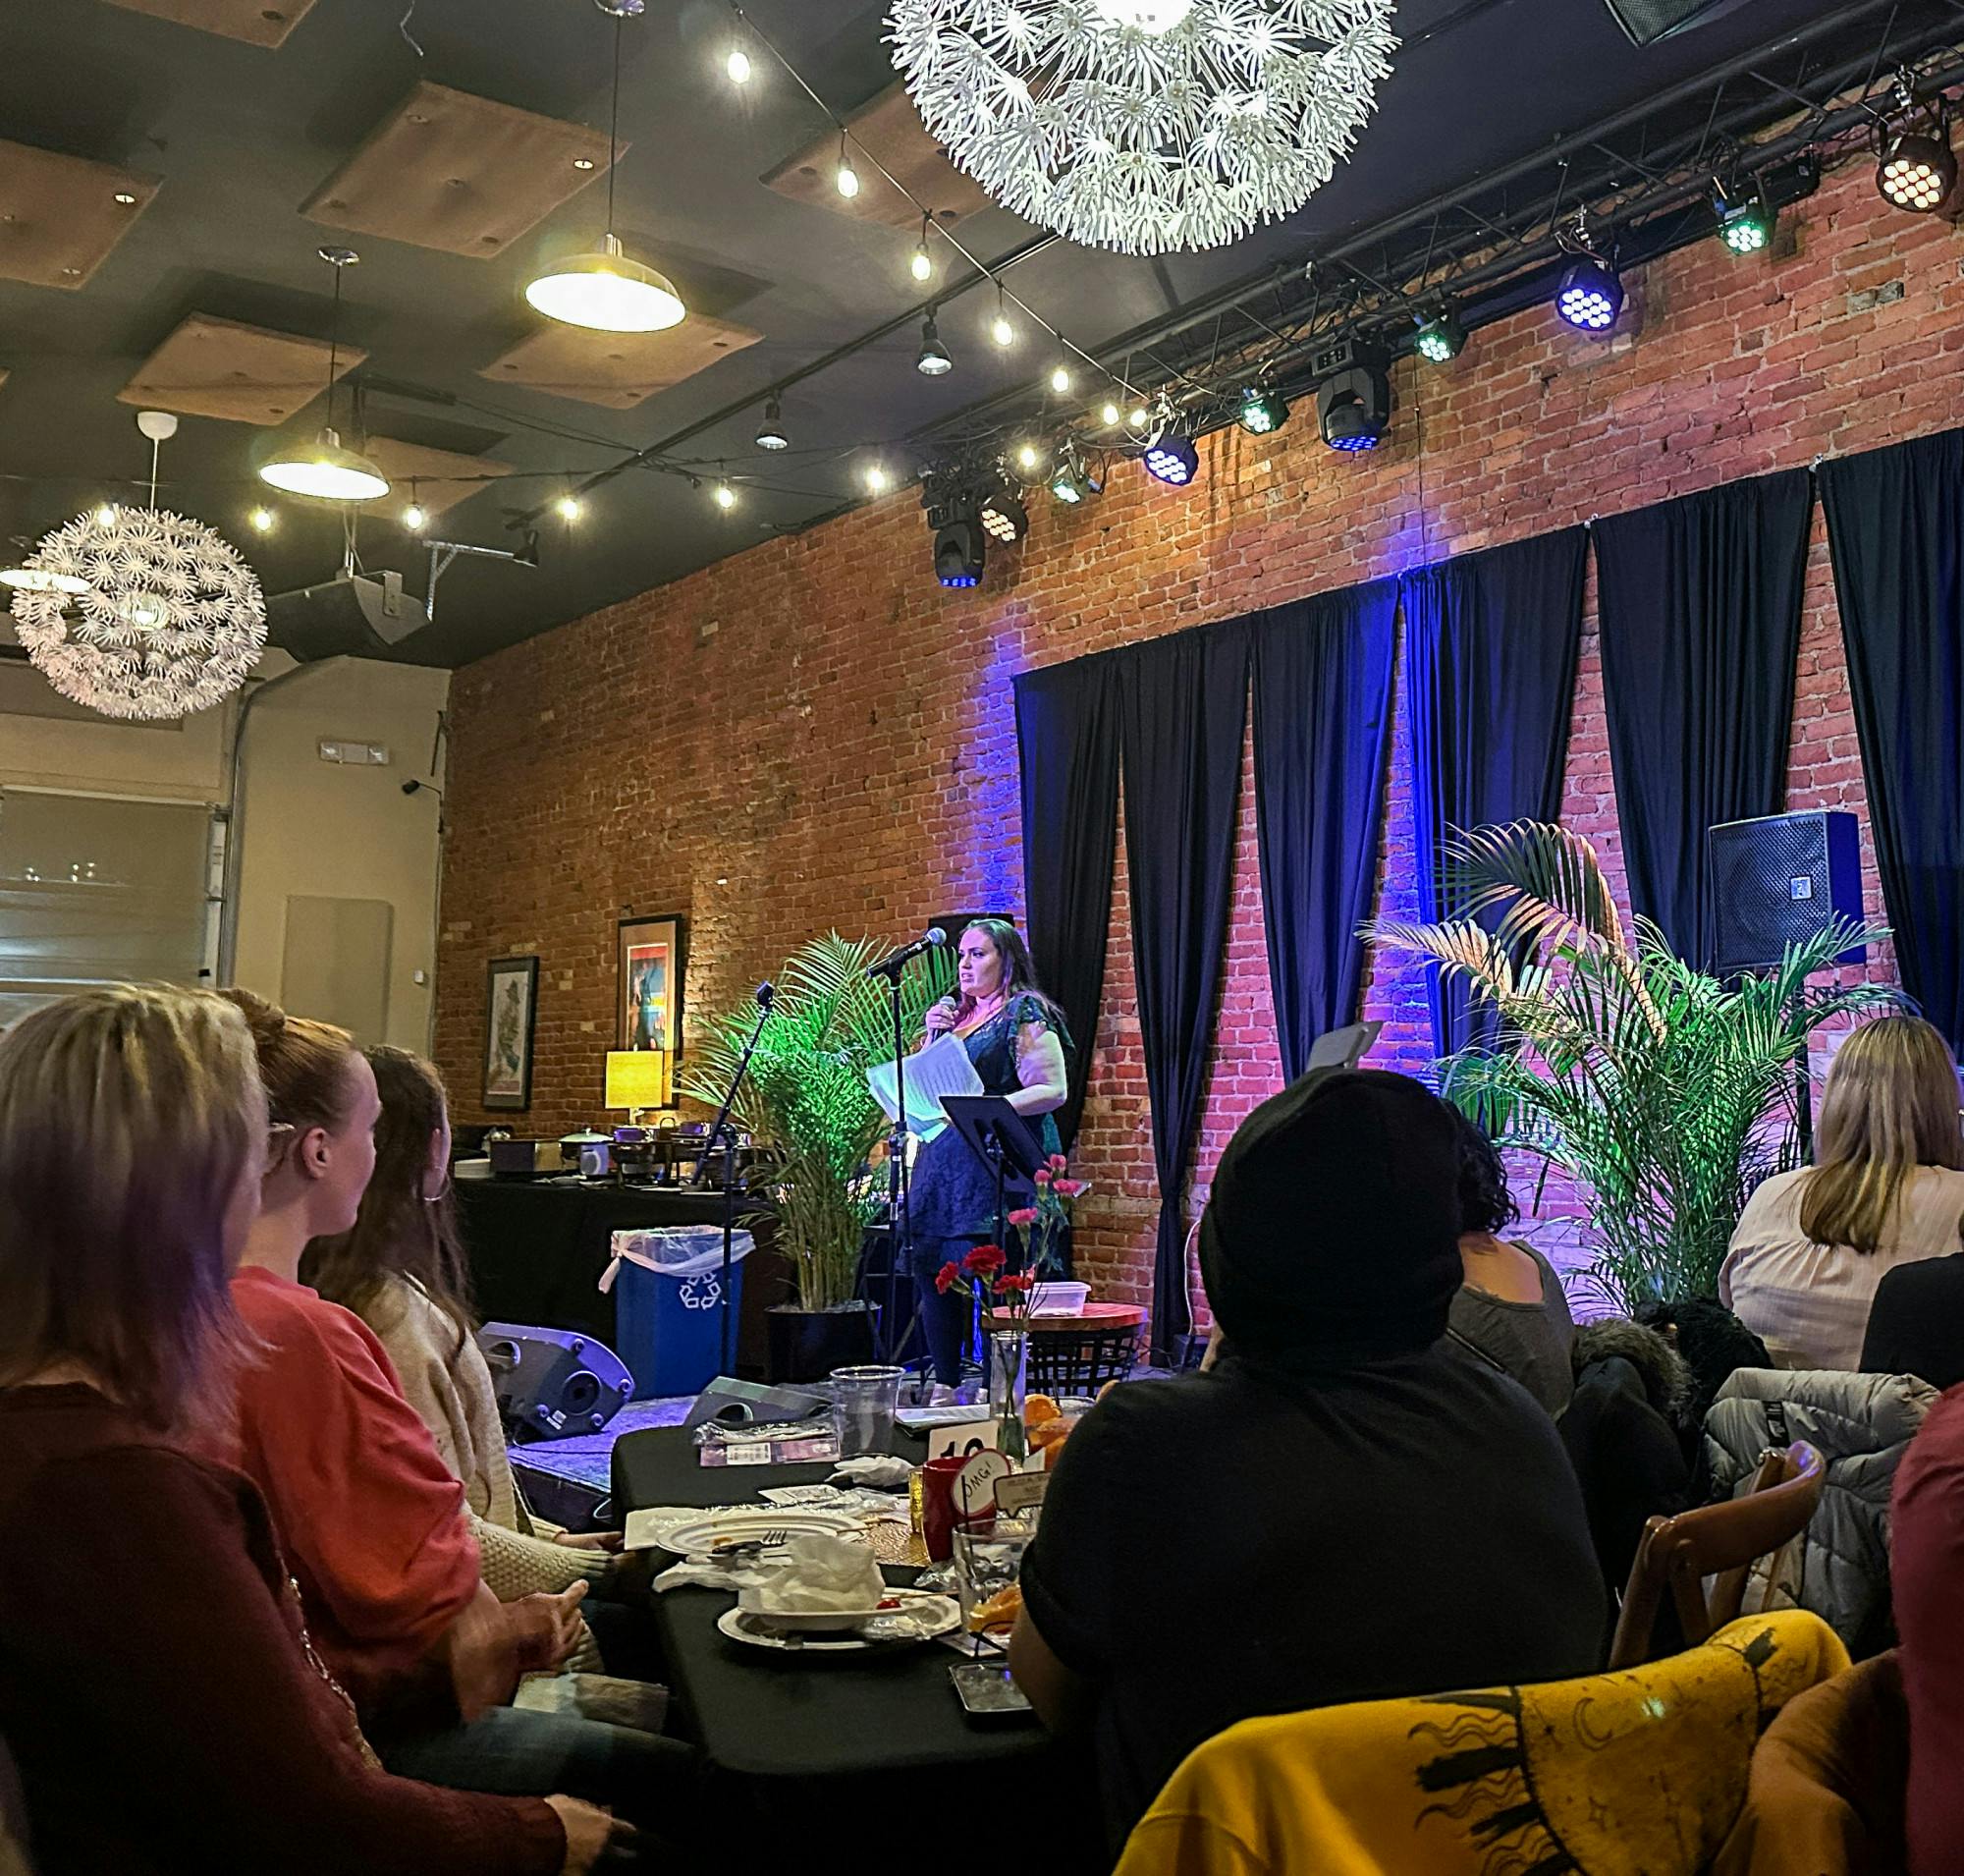 <p>The presenter, Rebecca Kasen, gave a speech before the We Laugh Comedy show hosted by the Women's Center of Greater Lansing on Feb. 25, 2023, in Lansing.</p>